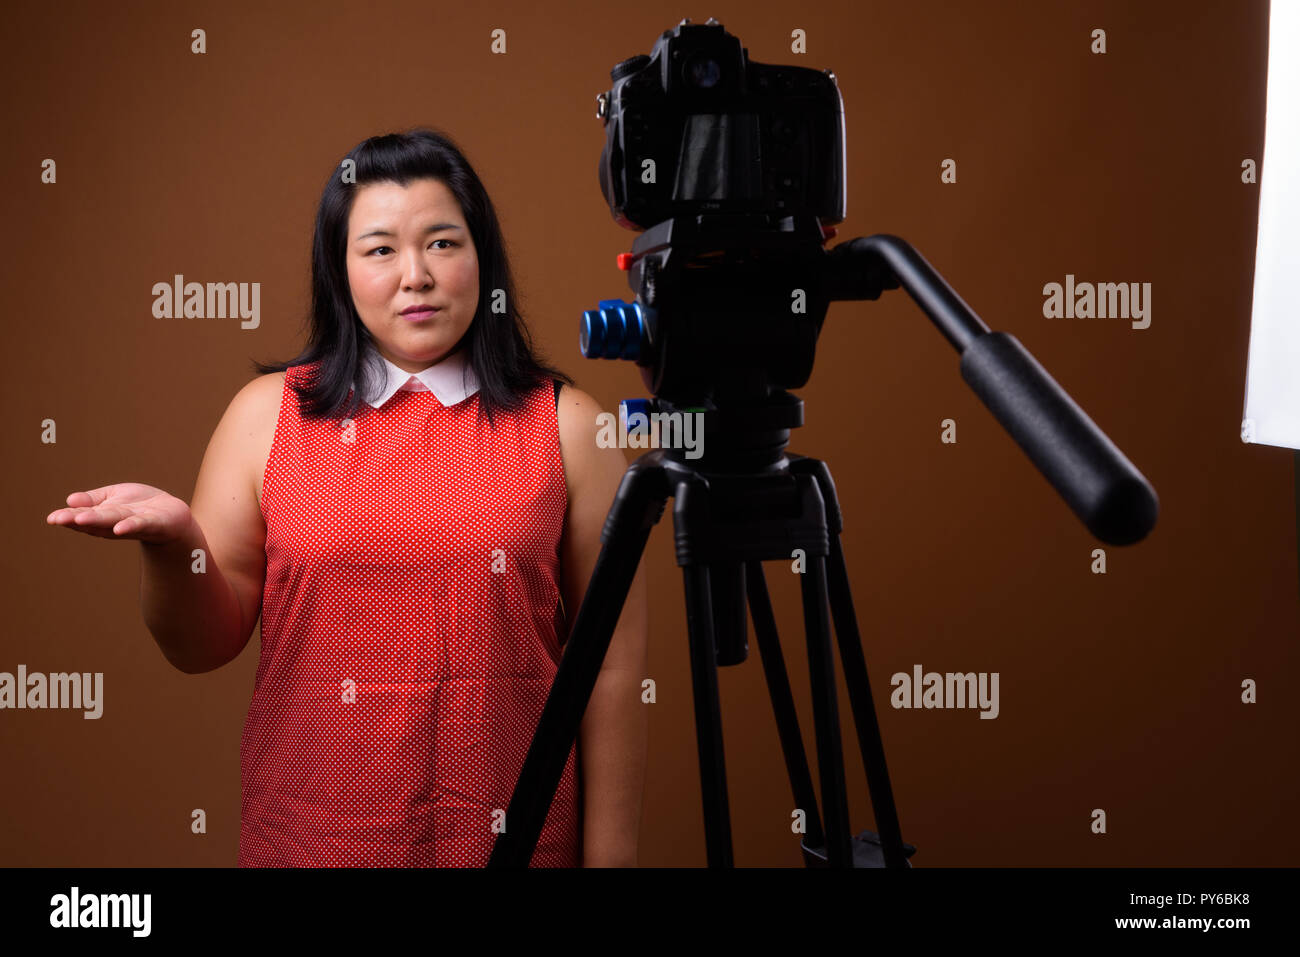 Overweight Asian woman vlogging in studio with dslr camera on tripod Stock Photo